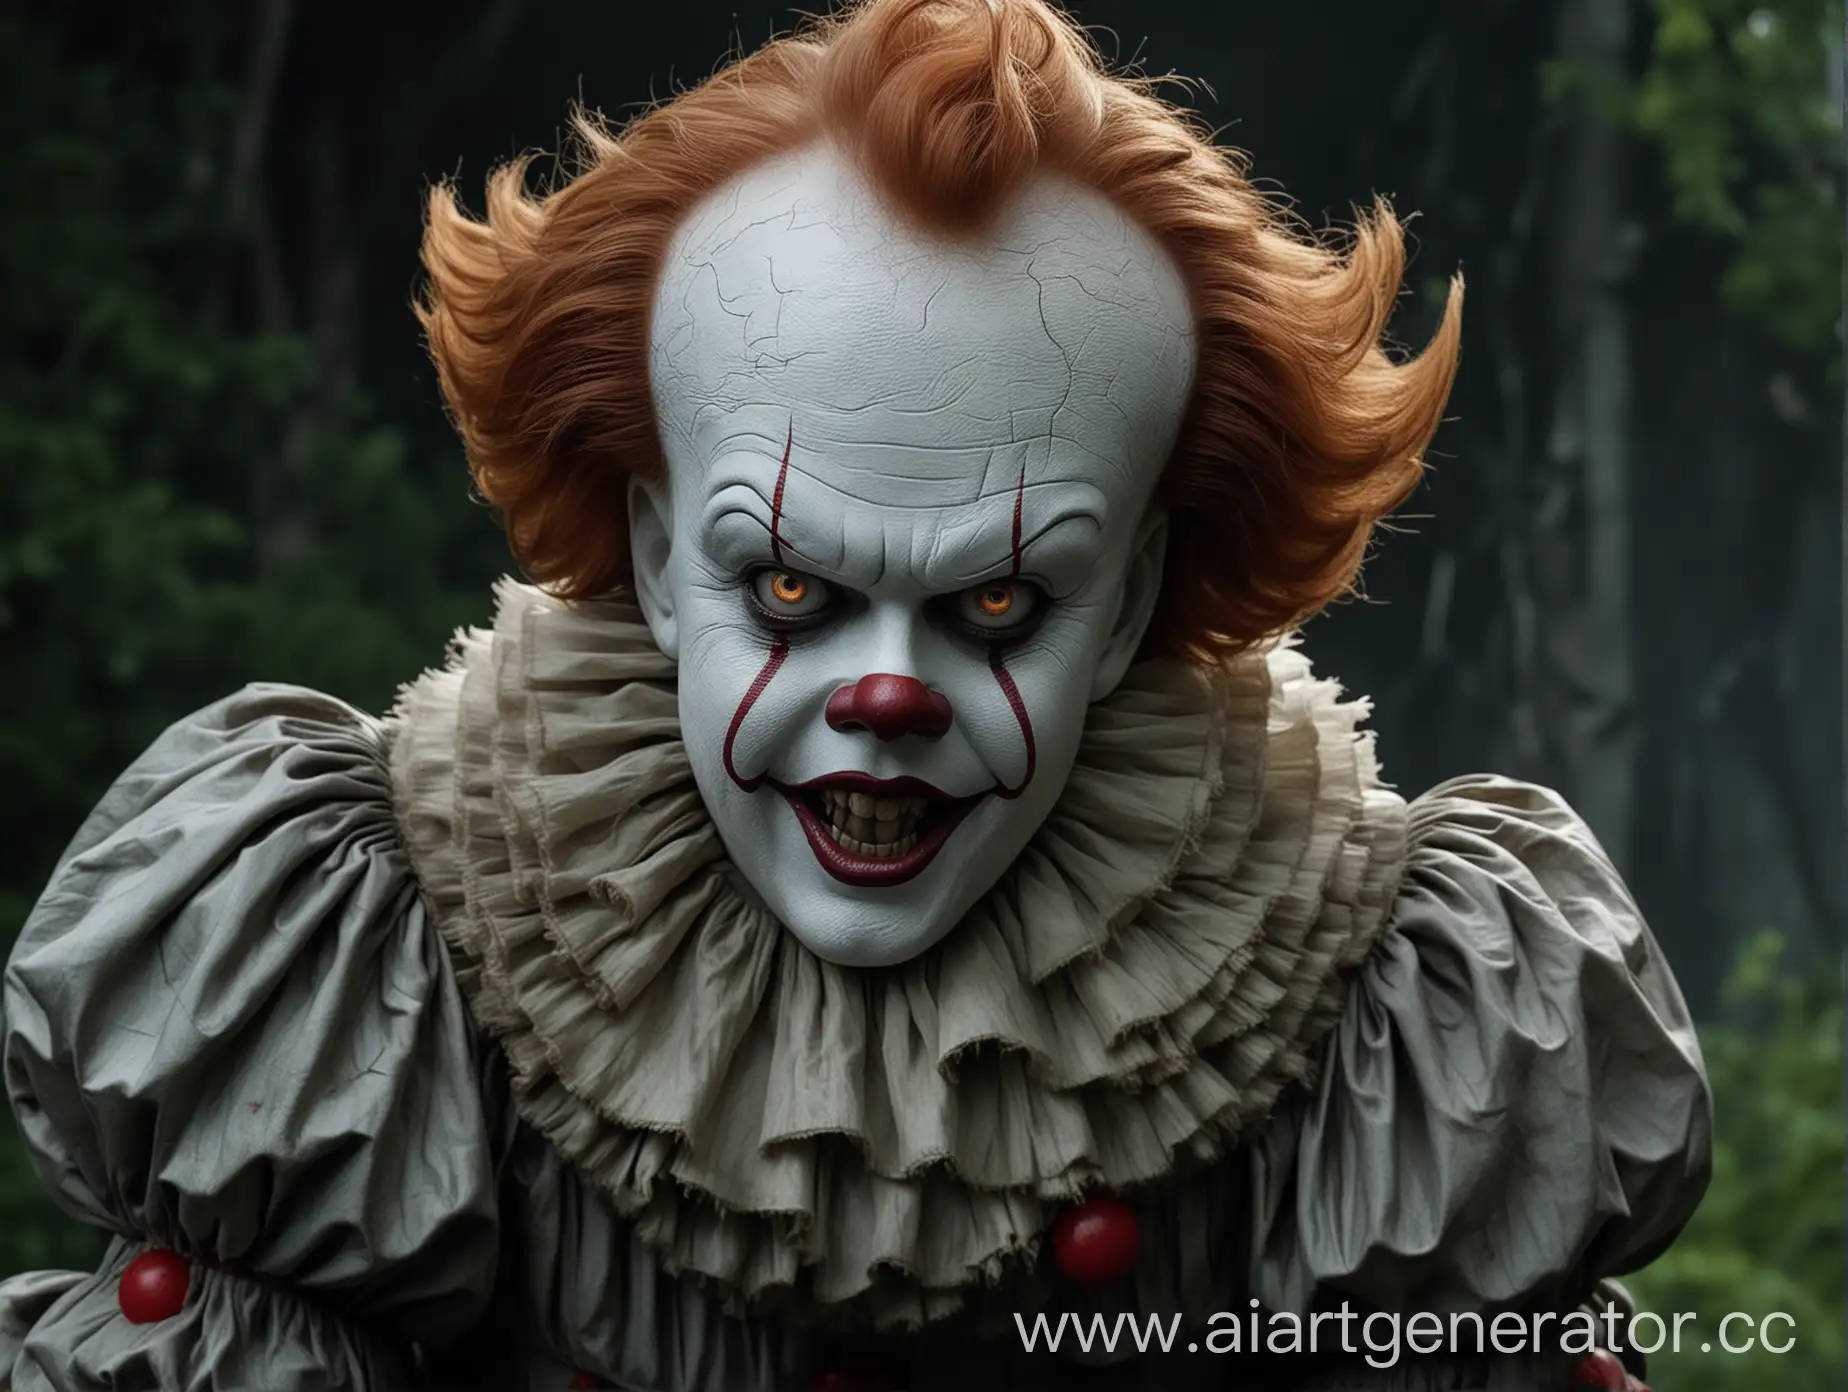 Sinister-Clown-Character-Inspired-by-Pennywise-from-It